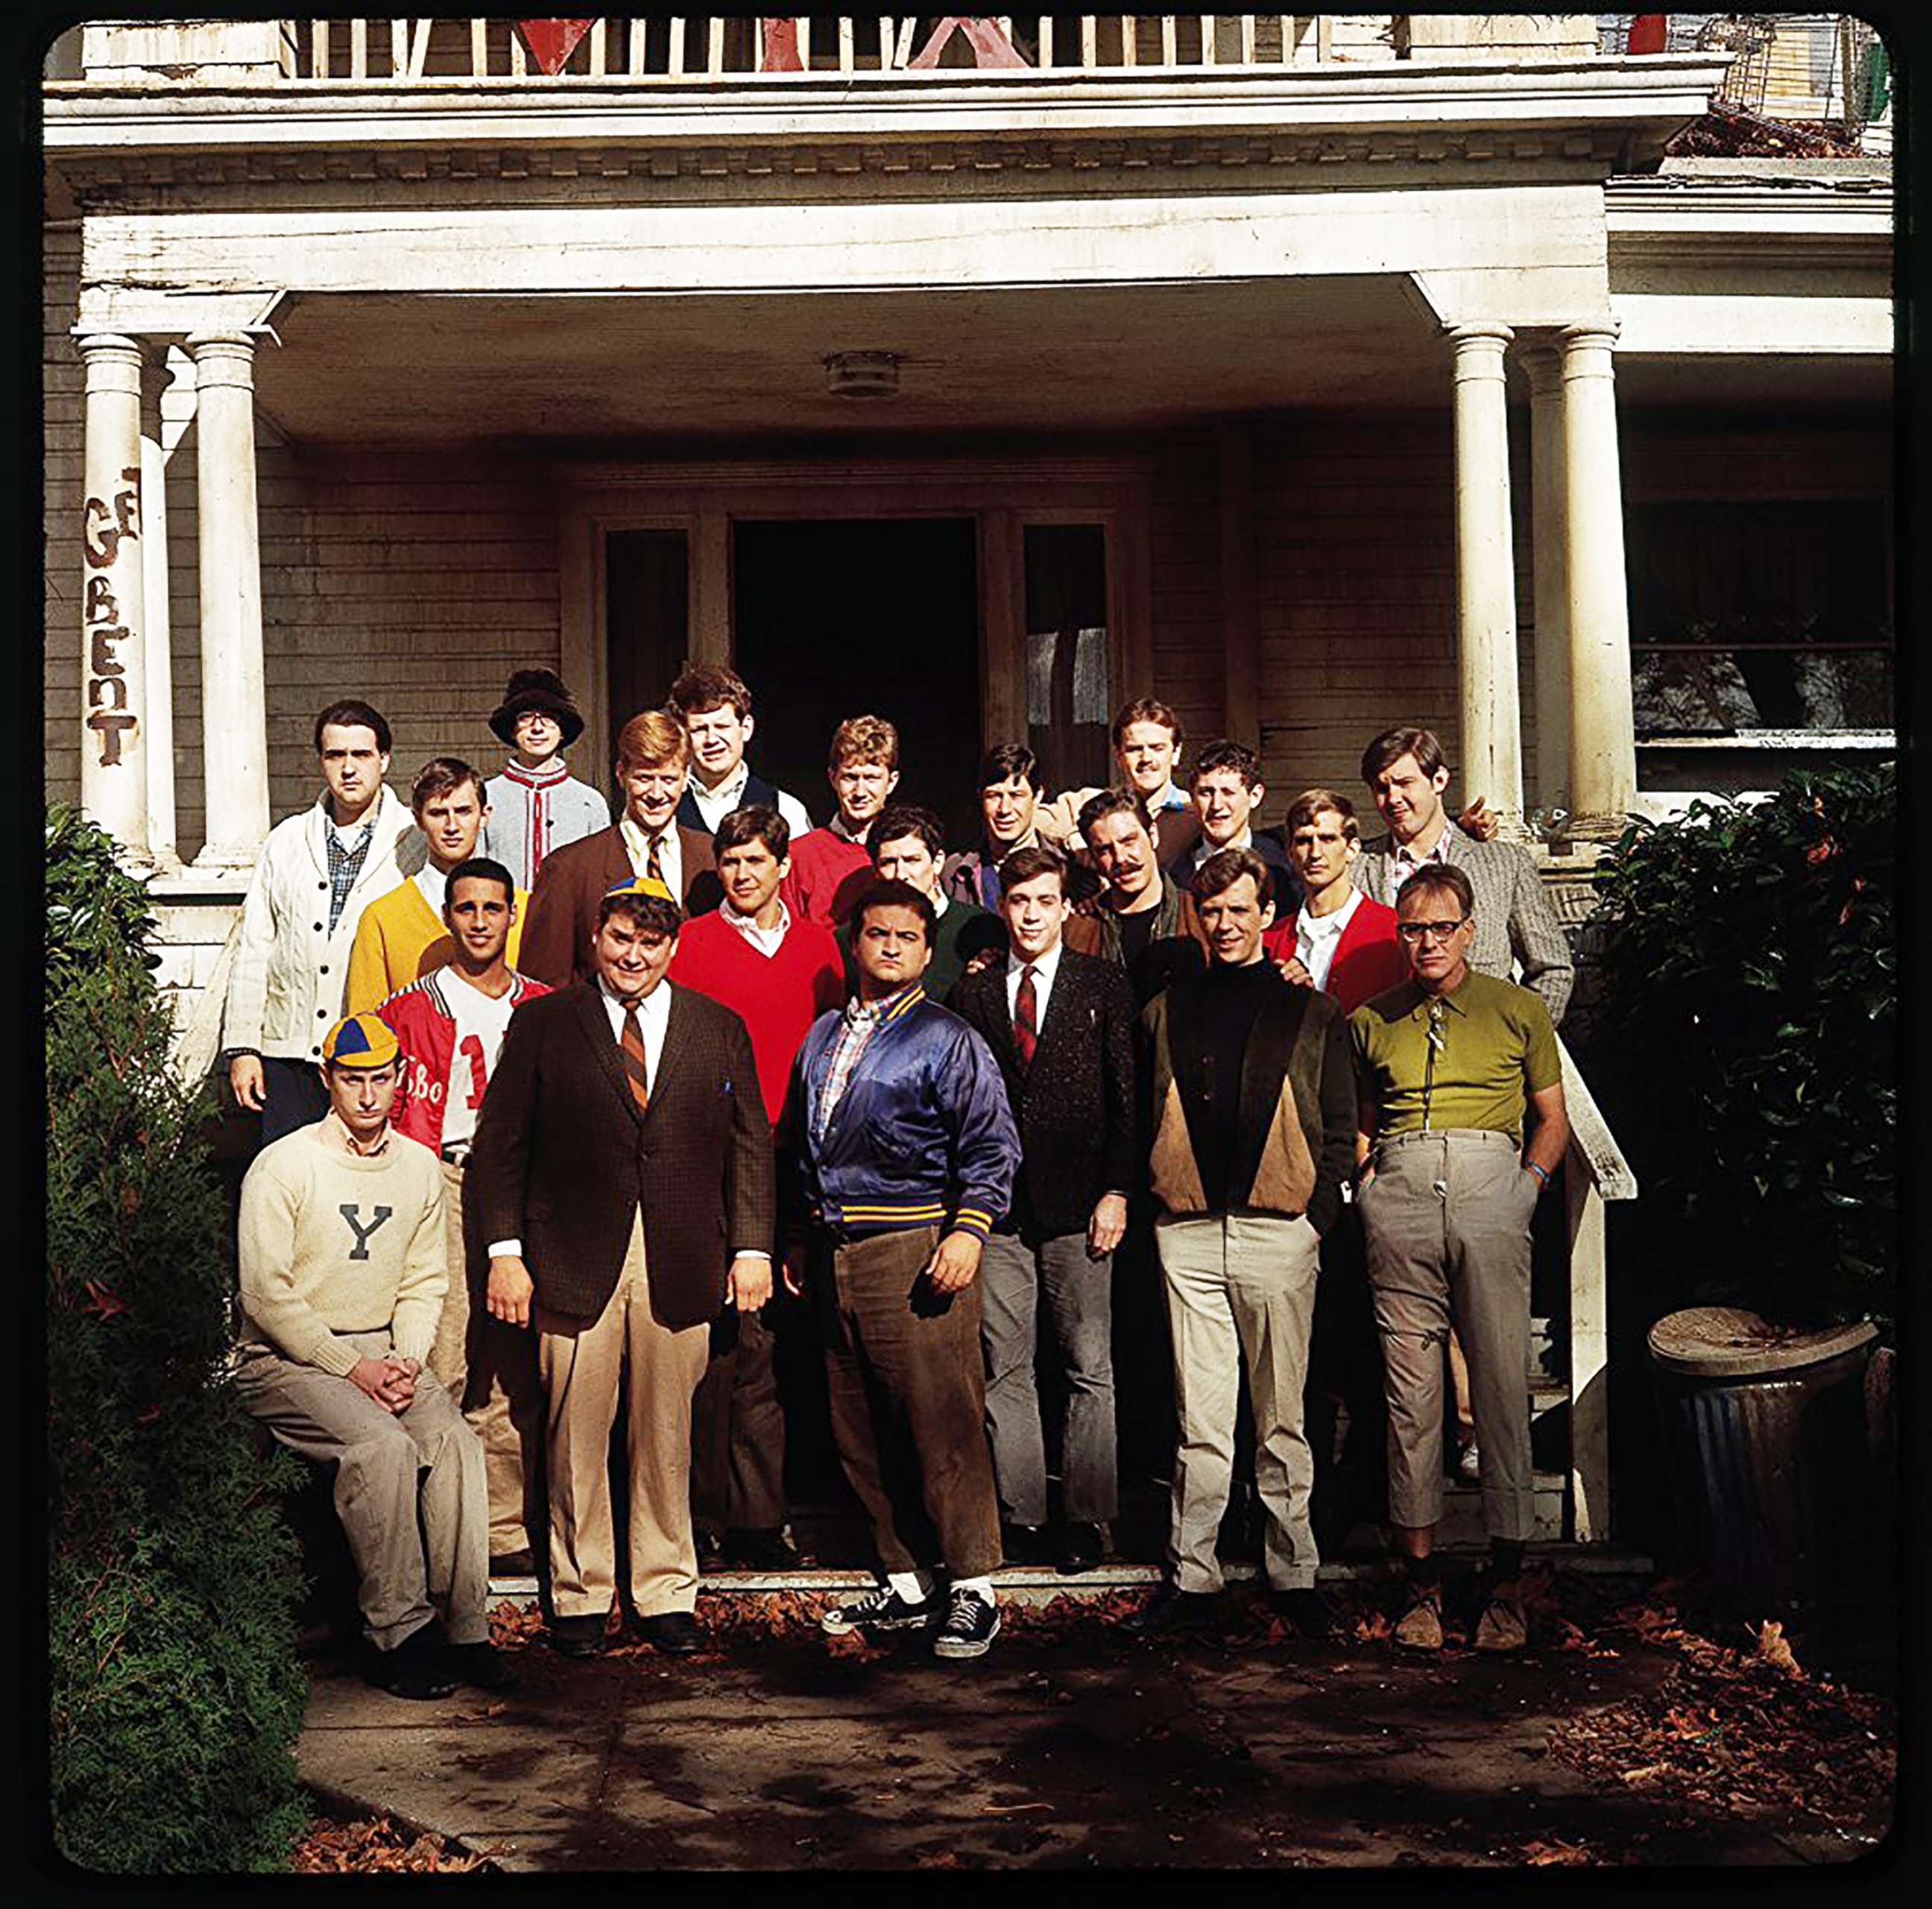 PHOTO: The cast of "Animal House" appears in this undated photo.